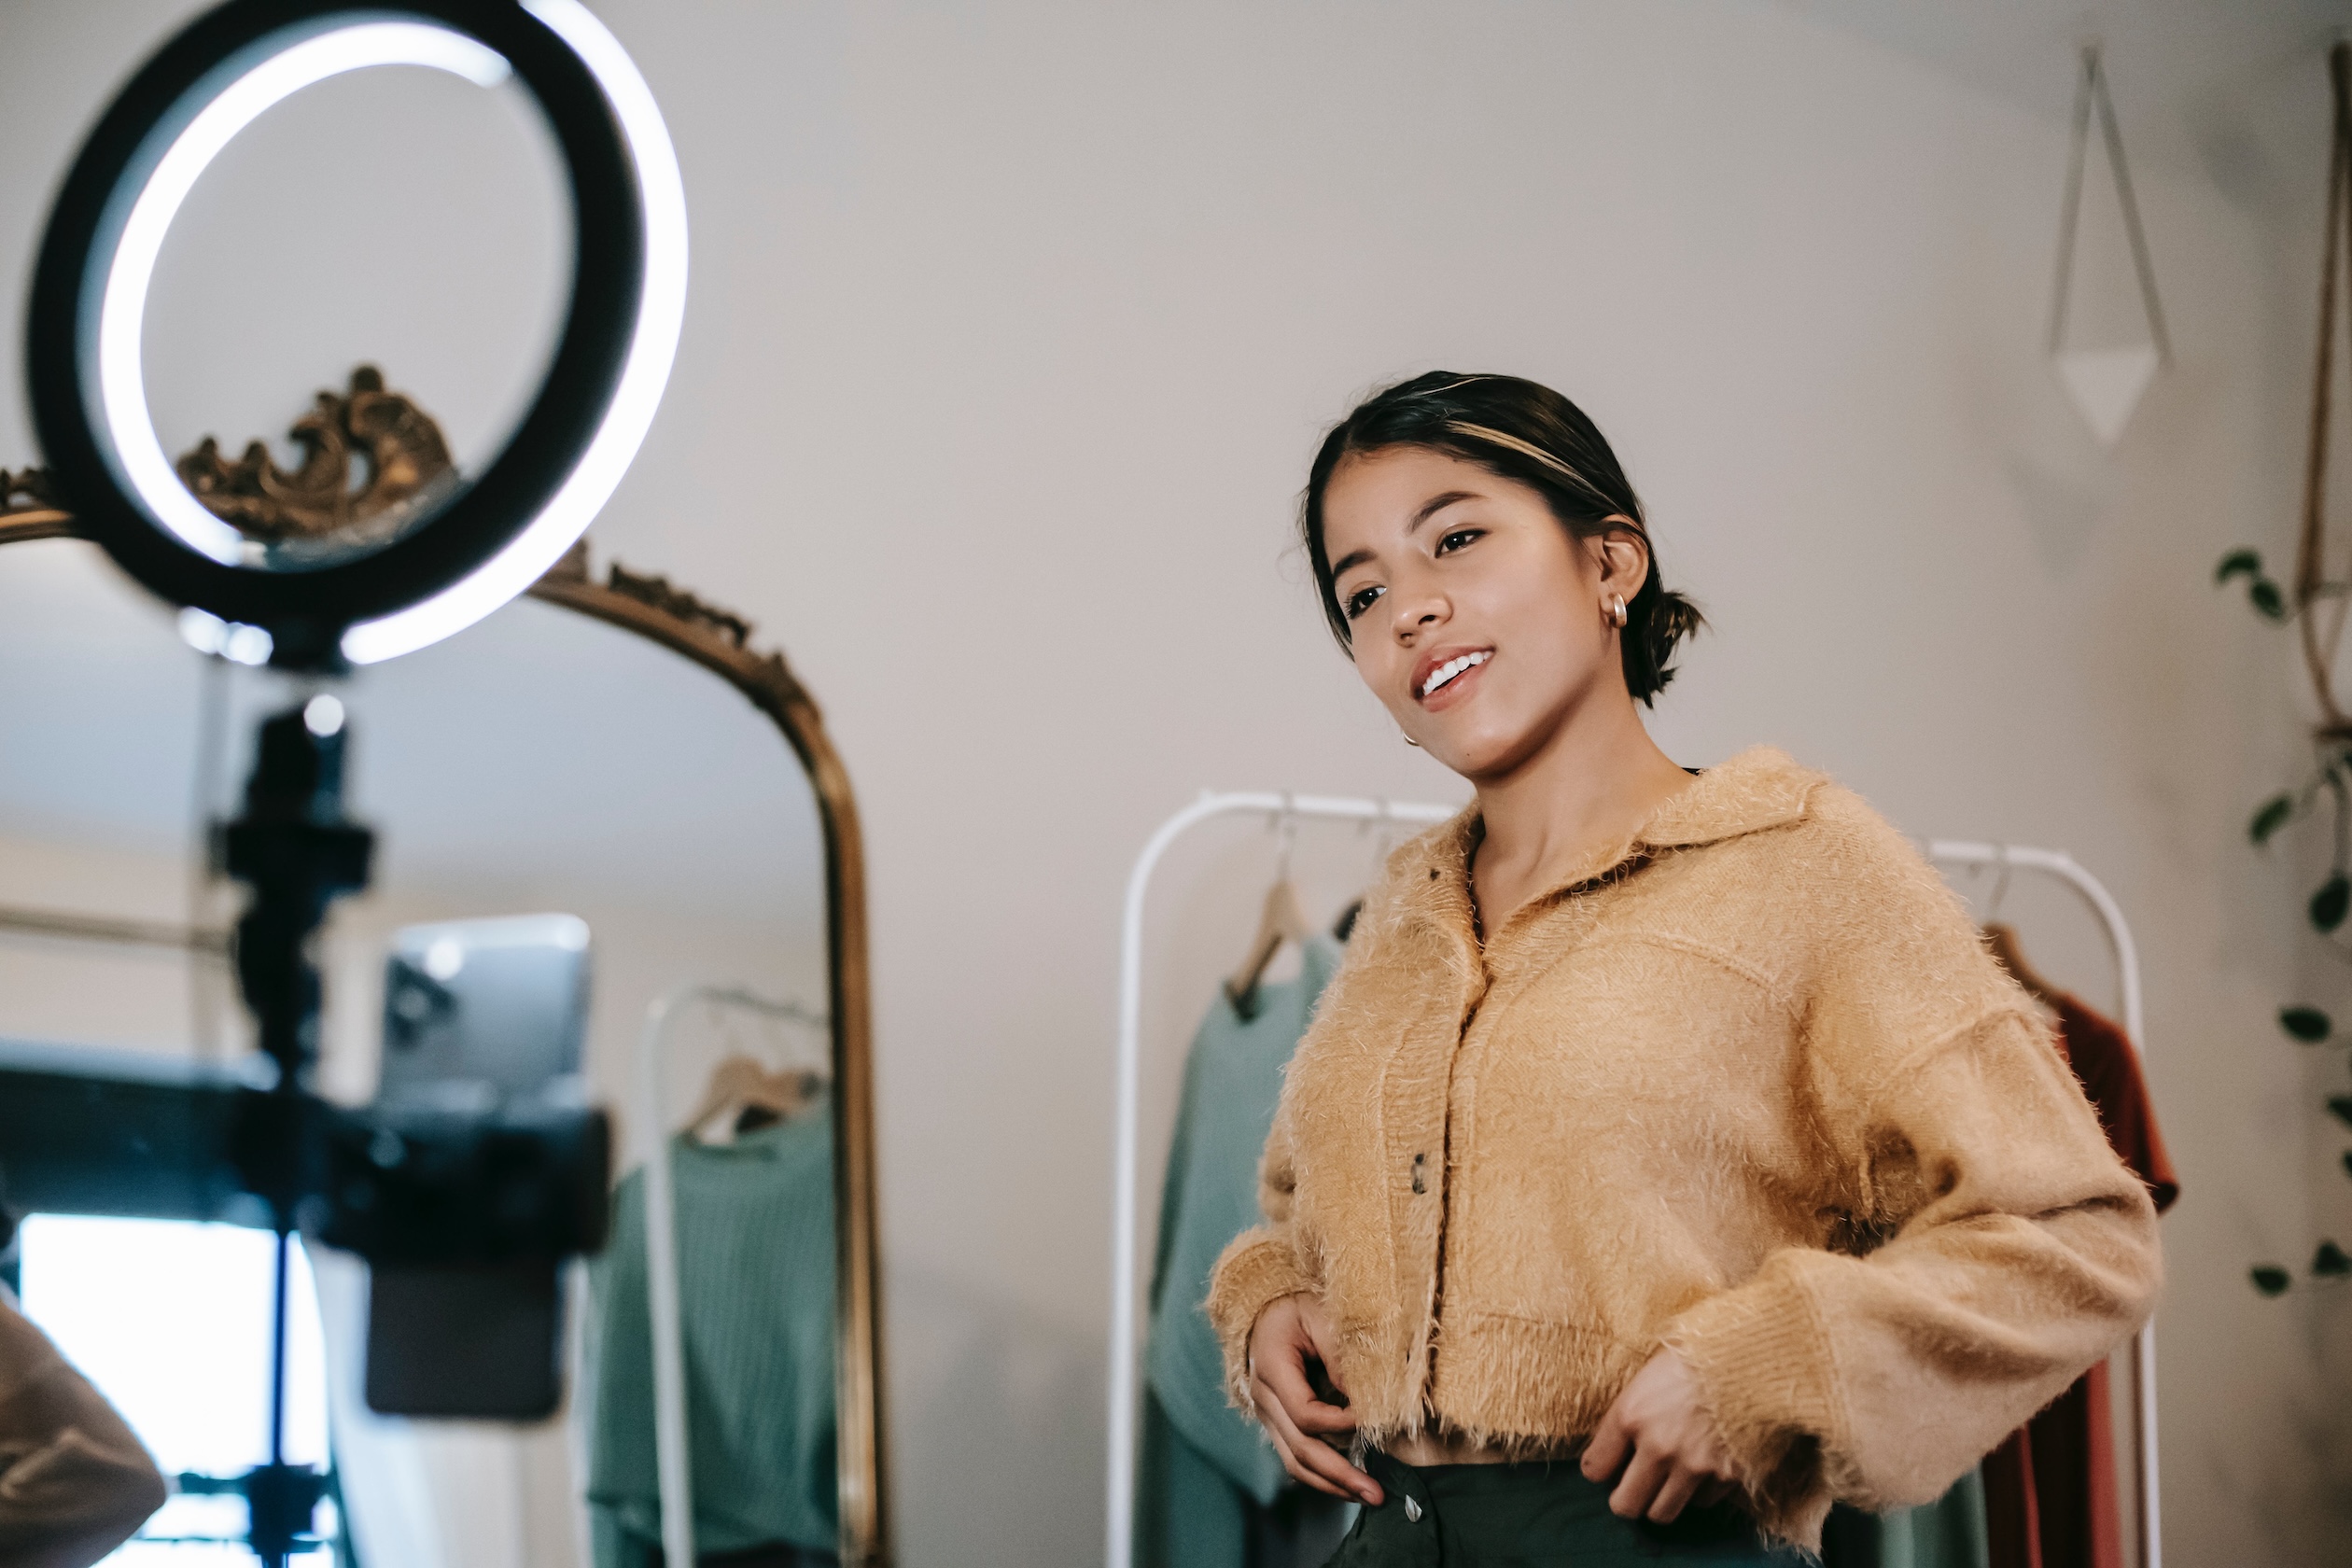 A dark haired young woman modeling a brown sweater while conducting a live stream in front of a mirror and a round ring light